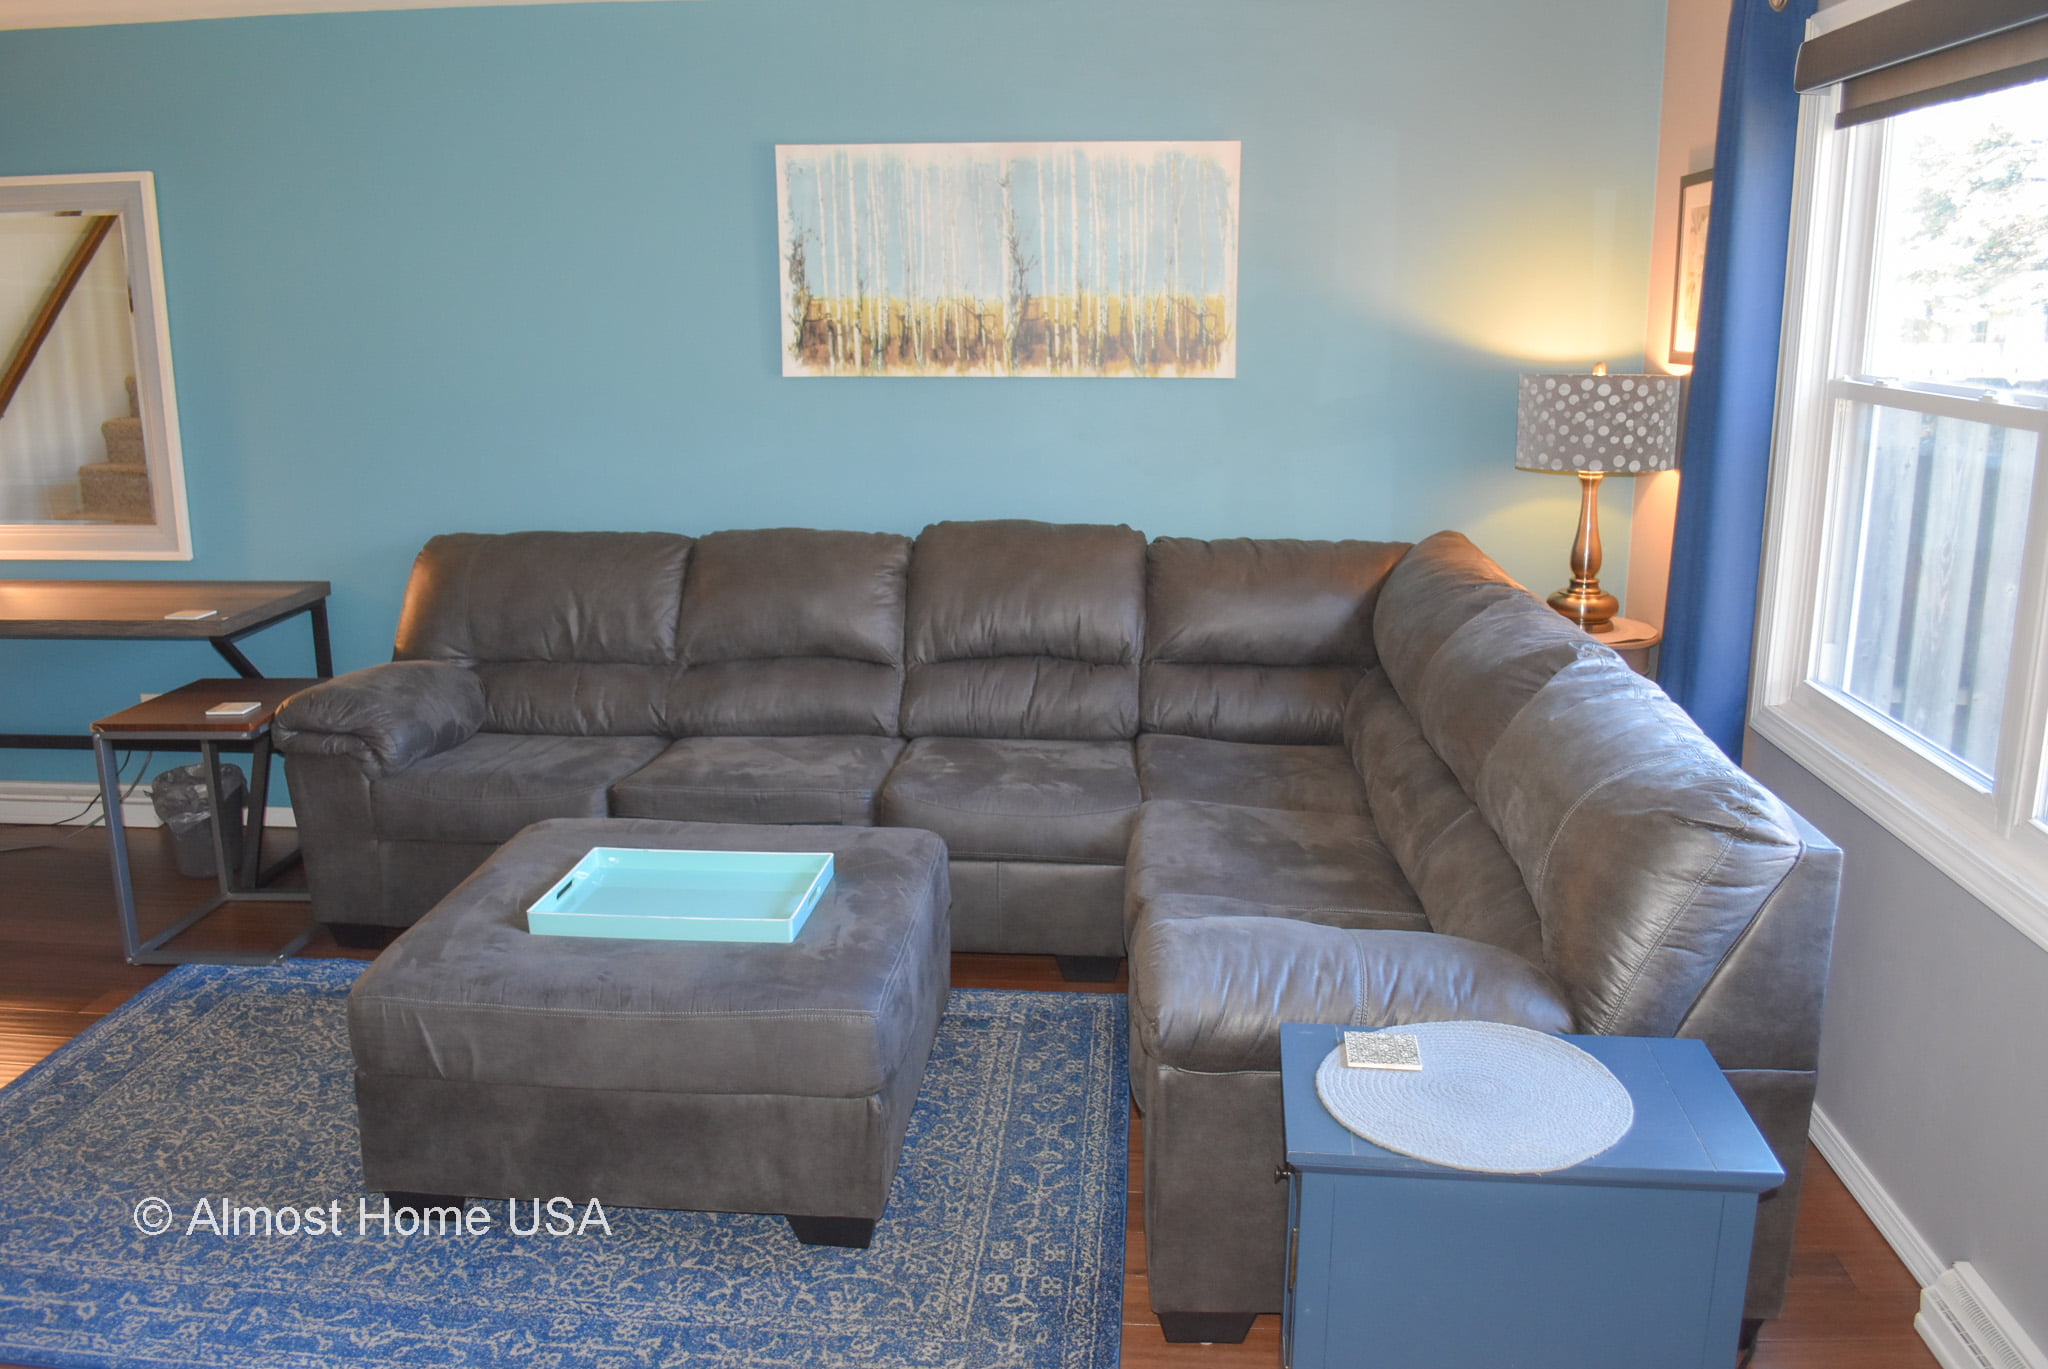 Large sofa and ottoman in furnished three bedroom rental home.